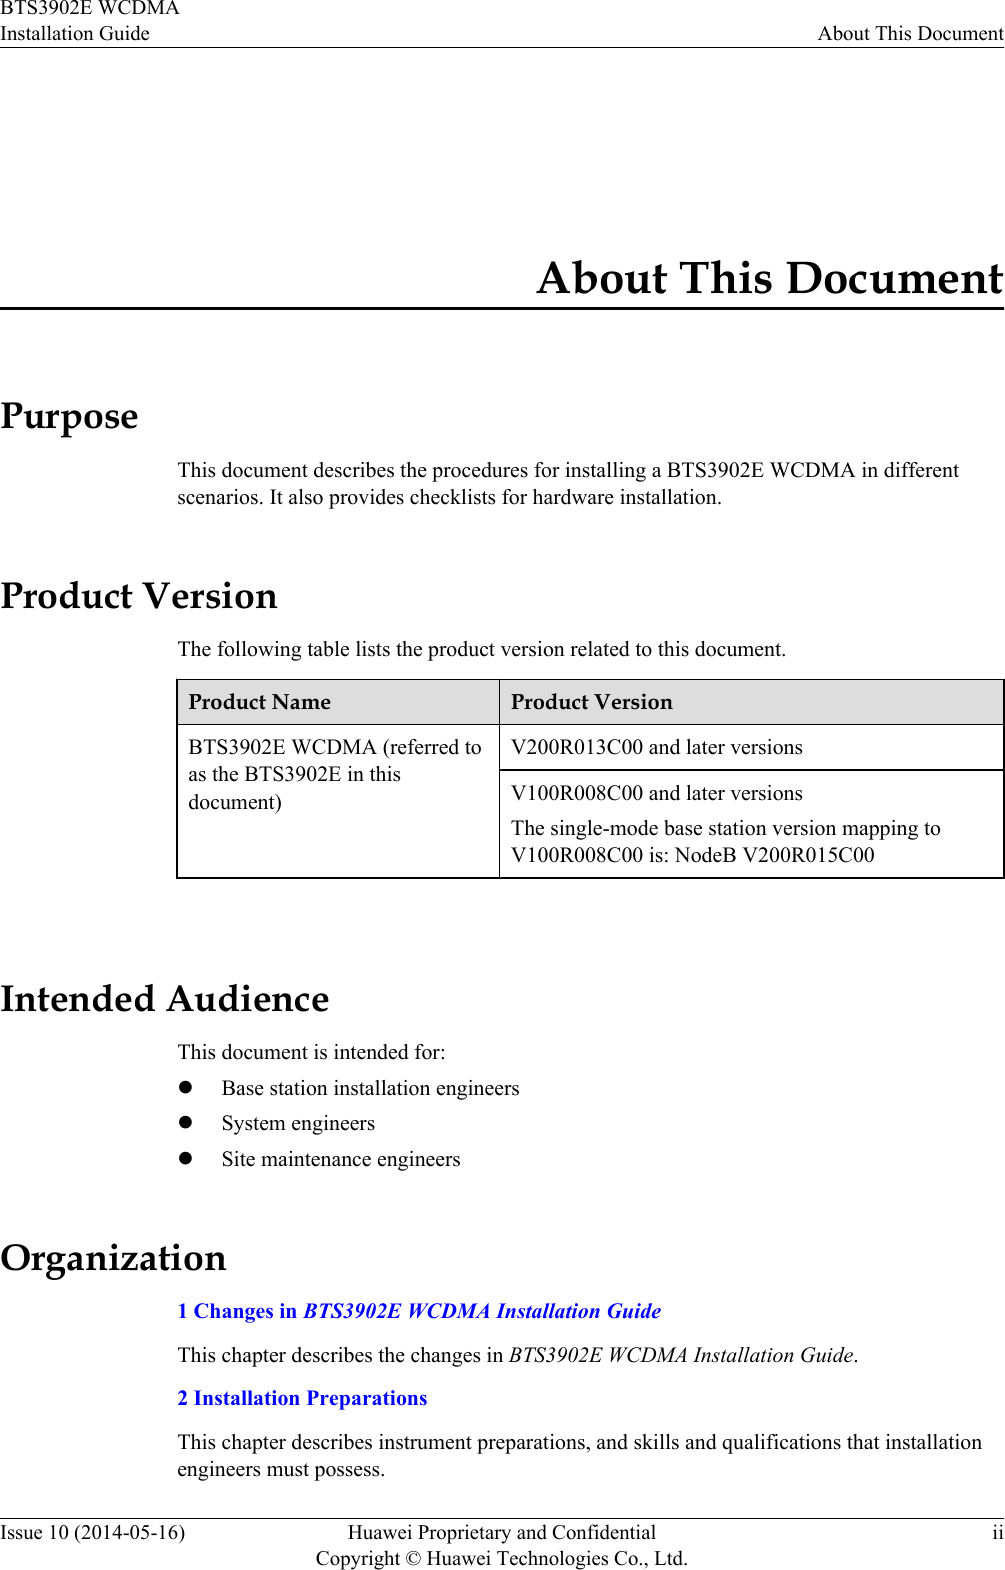 About This DocumentPurposeThis document describes the procedures for installing a BTS3902E WCDMA in differentscenarios. It also provides checklists for hardware installation.Product VersionThe following table lists the product version related to this document.Product Name Product VersionBTS3902E WCDMA (referred toas the BTS3902E in thisdocument)V200R013C00 and later versionsV100R008C00 and later versionsThe single-mode base station version mapping toV100R008C00 is: NodeB V200R015C00 Intended AudienceThis document is intended for:lBase station installation engineerslSystem engineerslSite maintenance engineersOrganization1 Changes in BTS3902E WCDMA Installation GuideThis chapter describes the changes in BTS3902E WCDMA Installation Guide.2 Installation PreparationsThis chapter describes instrument preparations, and skills and qualifications that installationengineers must possess.BTS3902E WCDMAInstallation Guide About This DocumentIssue 10 (2014-05-16) Huawei Proprietary and ConfidentialCopyright © Huawei Technologies Co., Ltd.ii